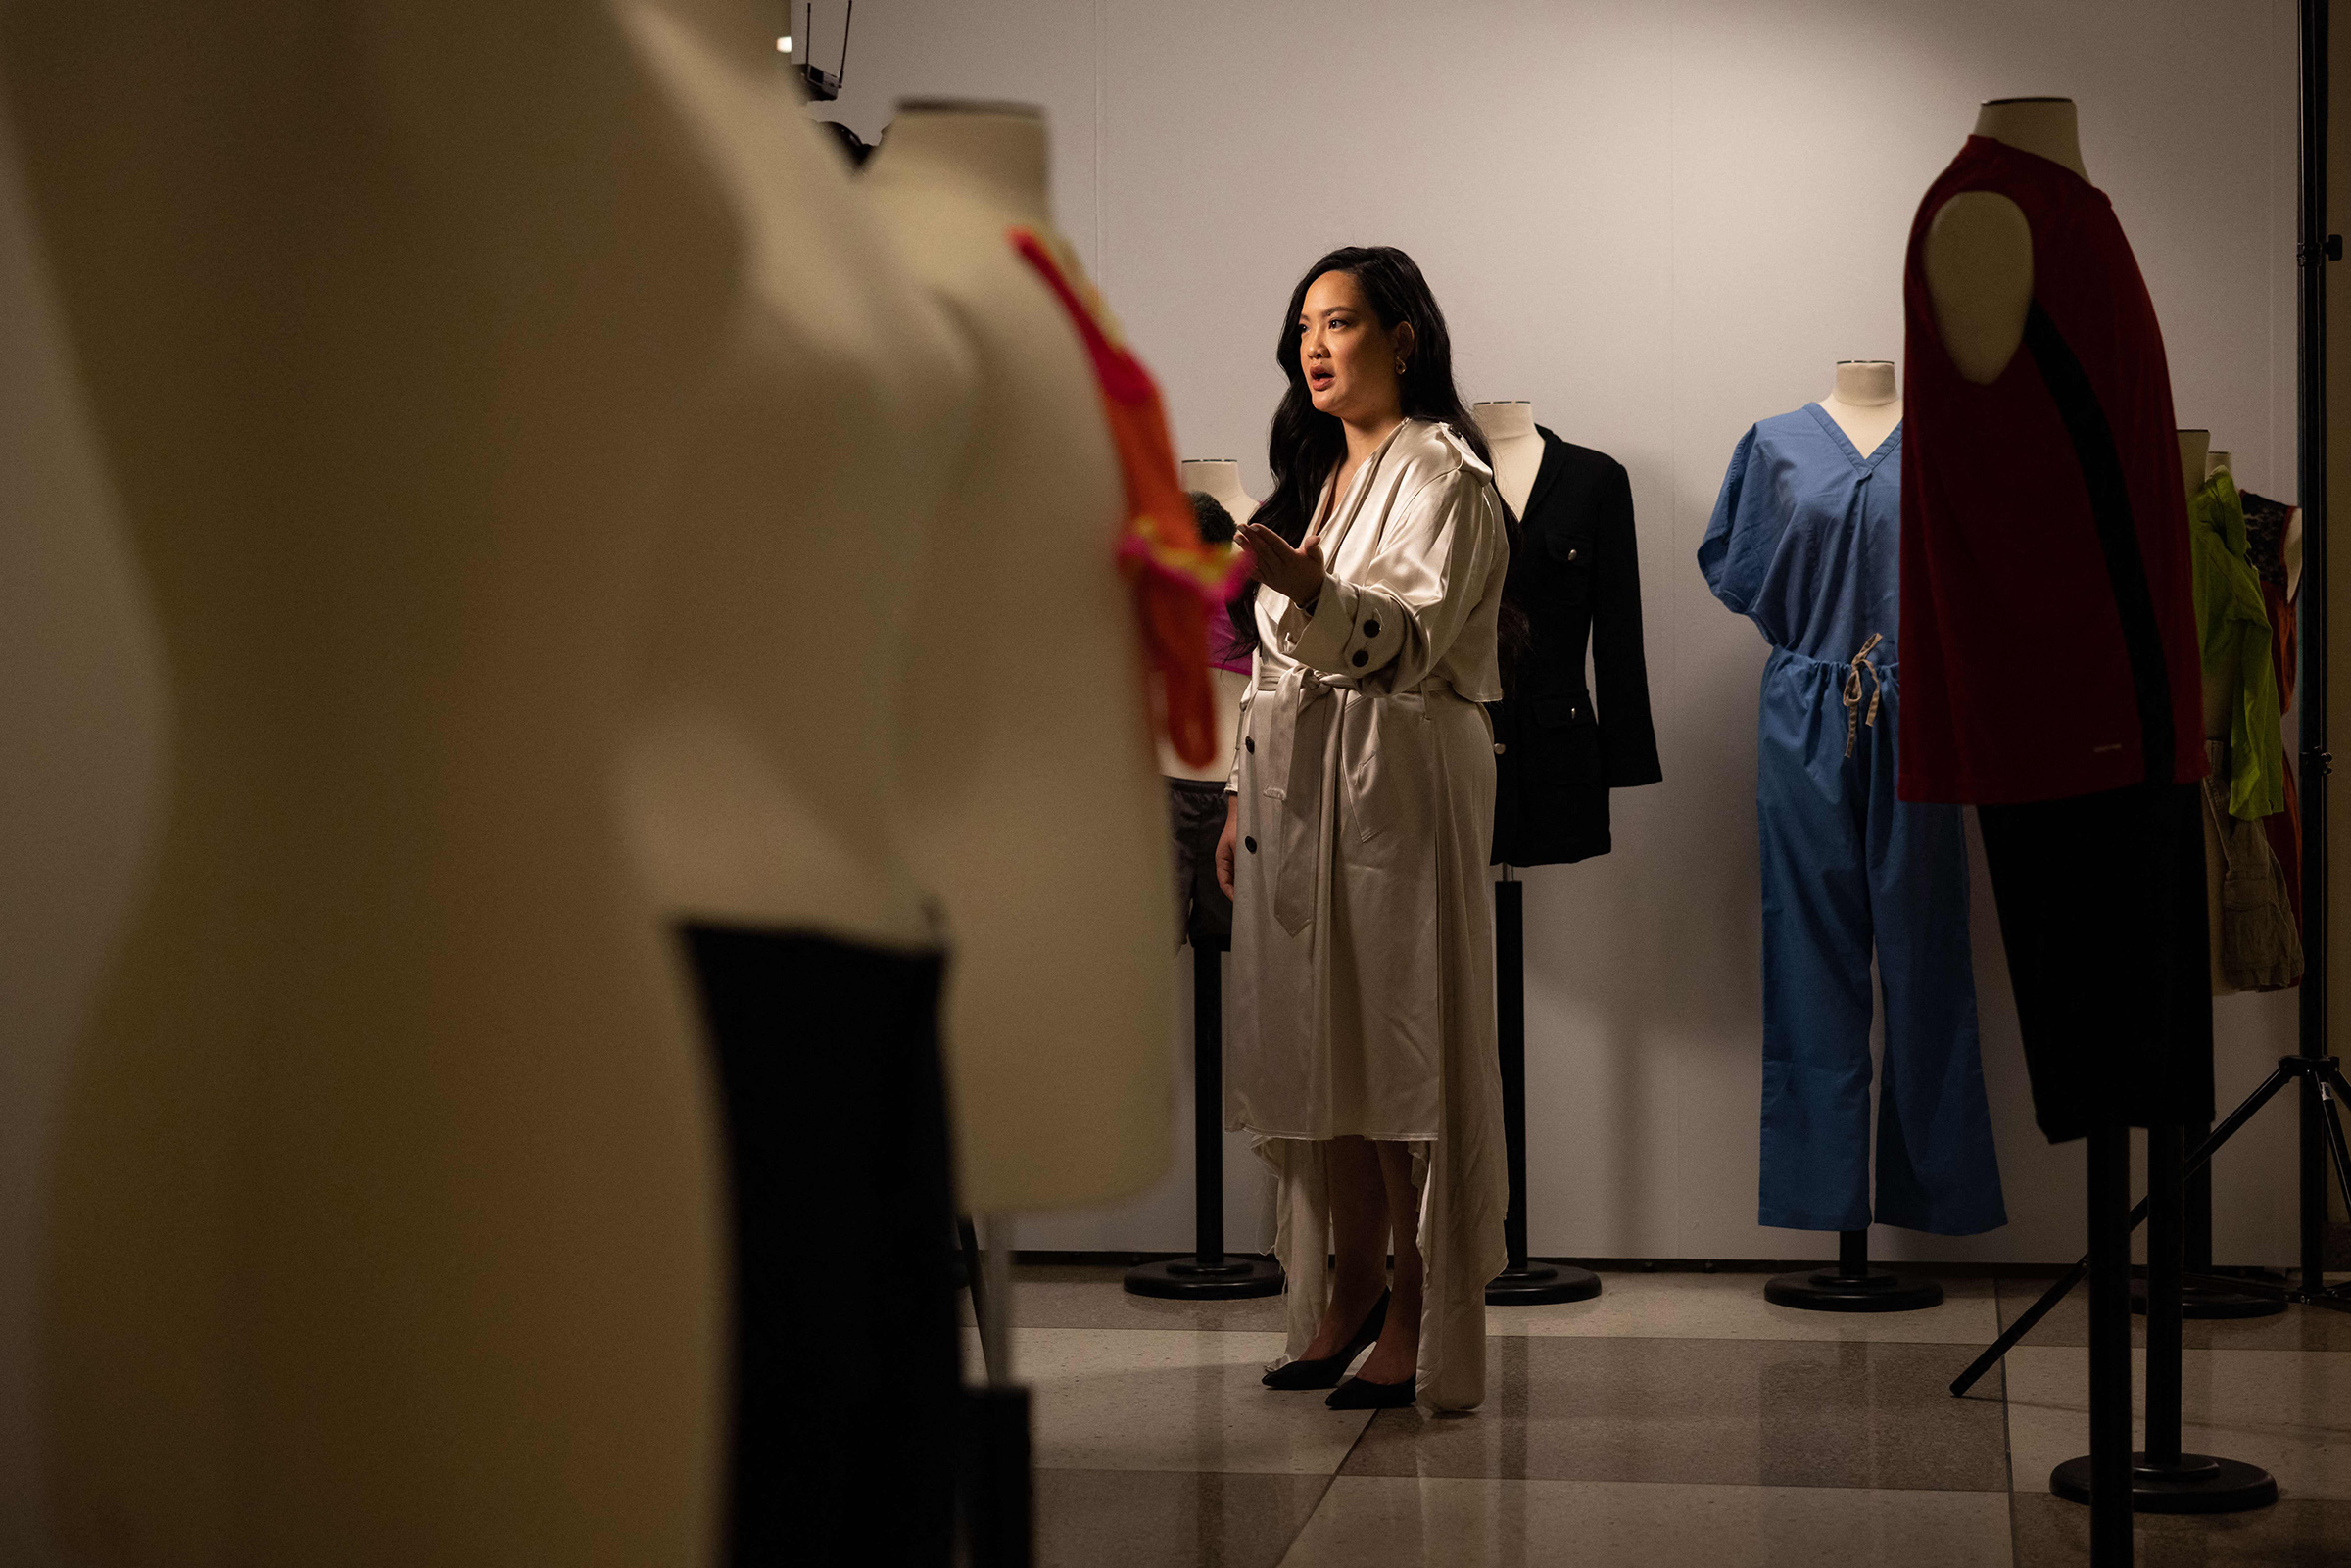 Amanda Nguyen, CEO and founder of Rise, speaks during an interview in the "What Were You Wearing?" exhibition at the U.N. headquarters on Sept. 2, 2022, in New York City. (Yuki Iwamura—AFP/Getty Images)